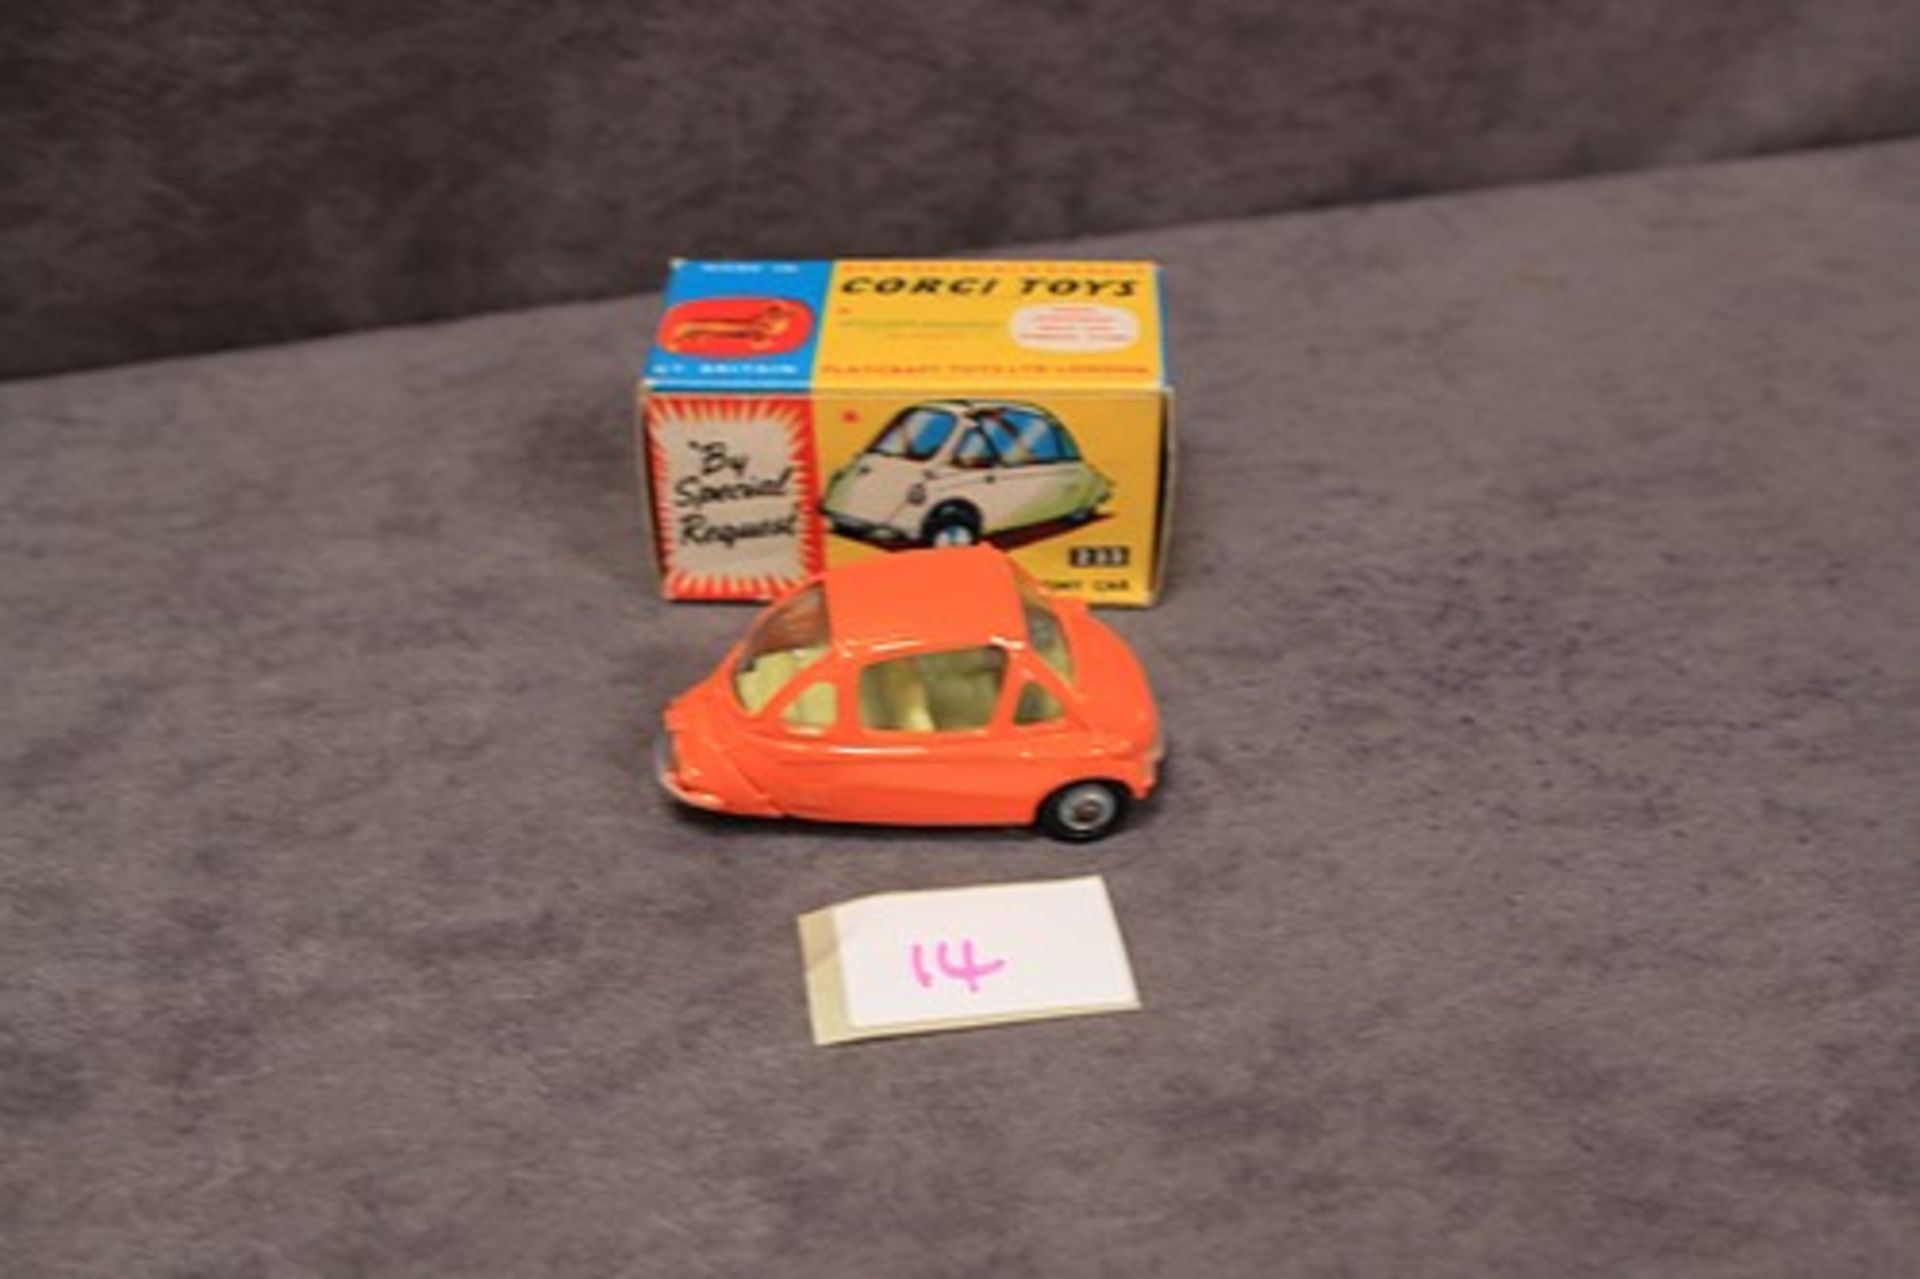 Mint Corgi Toys Diecast #233 Heinkel Economy Car in orange with leaflet in a nr mint box some - Image 2 of 2